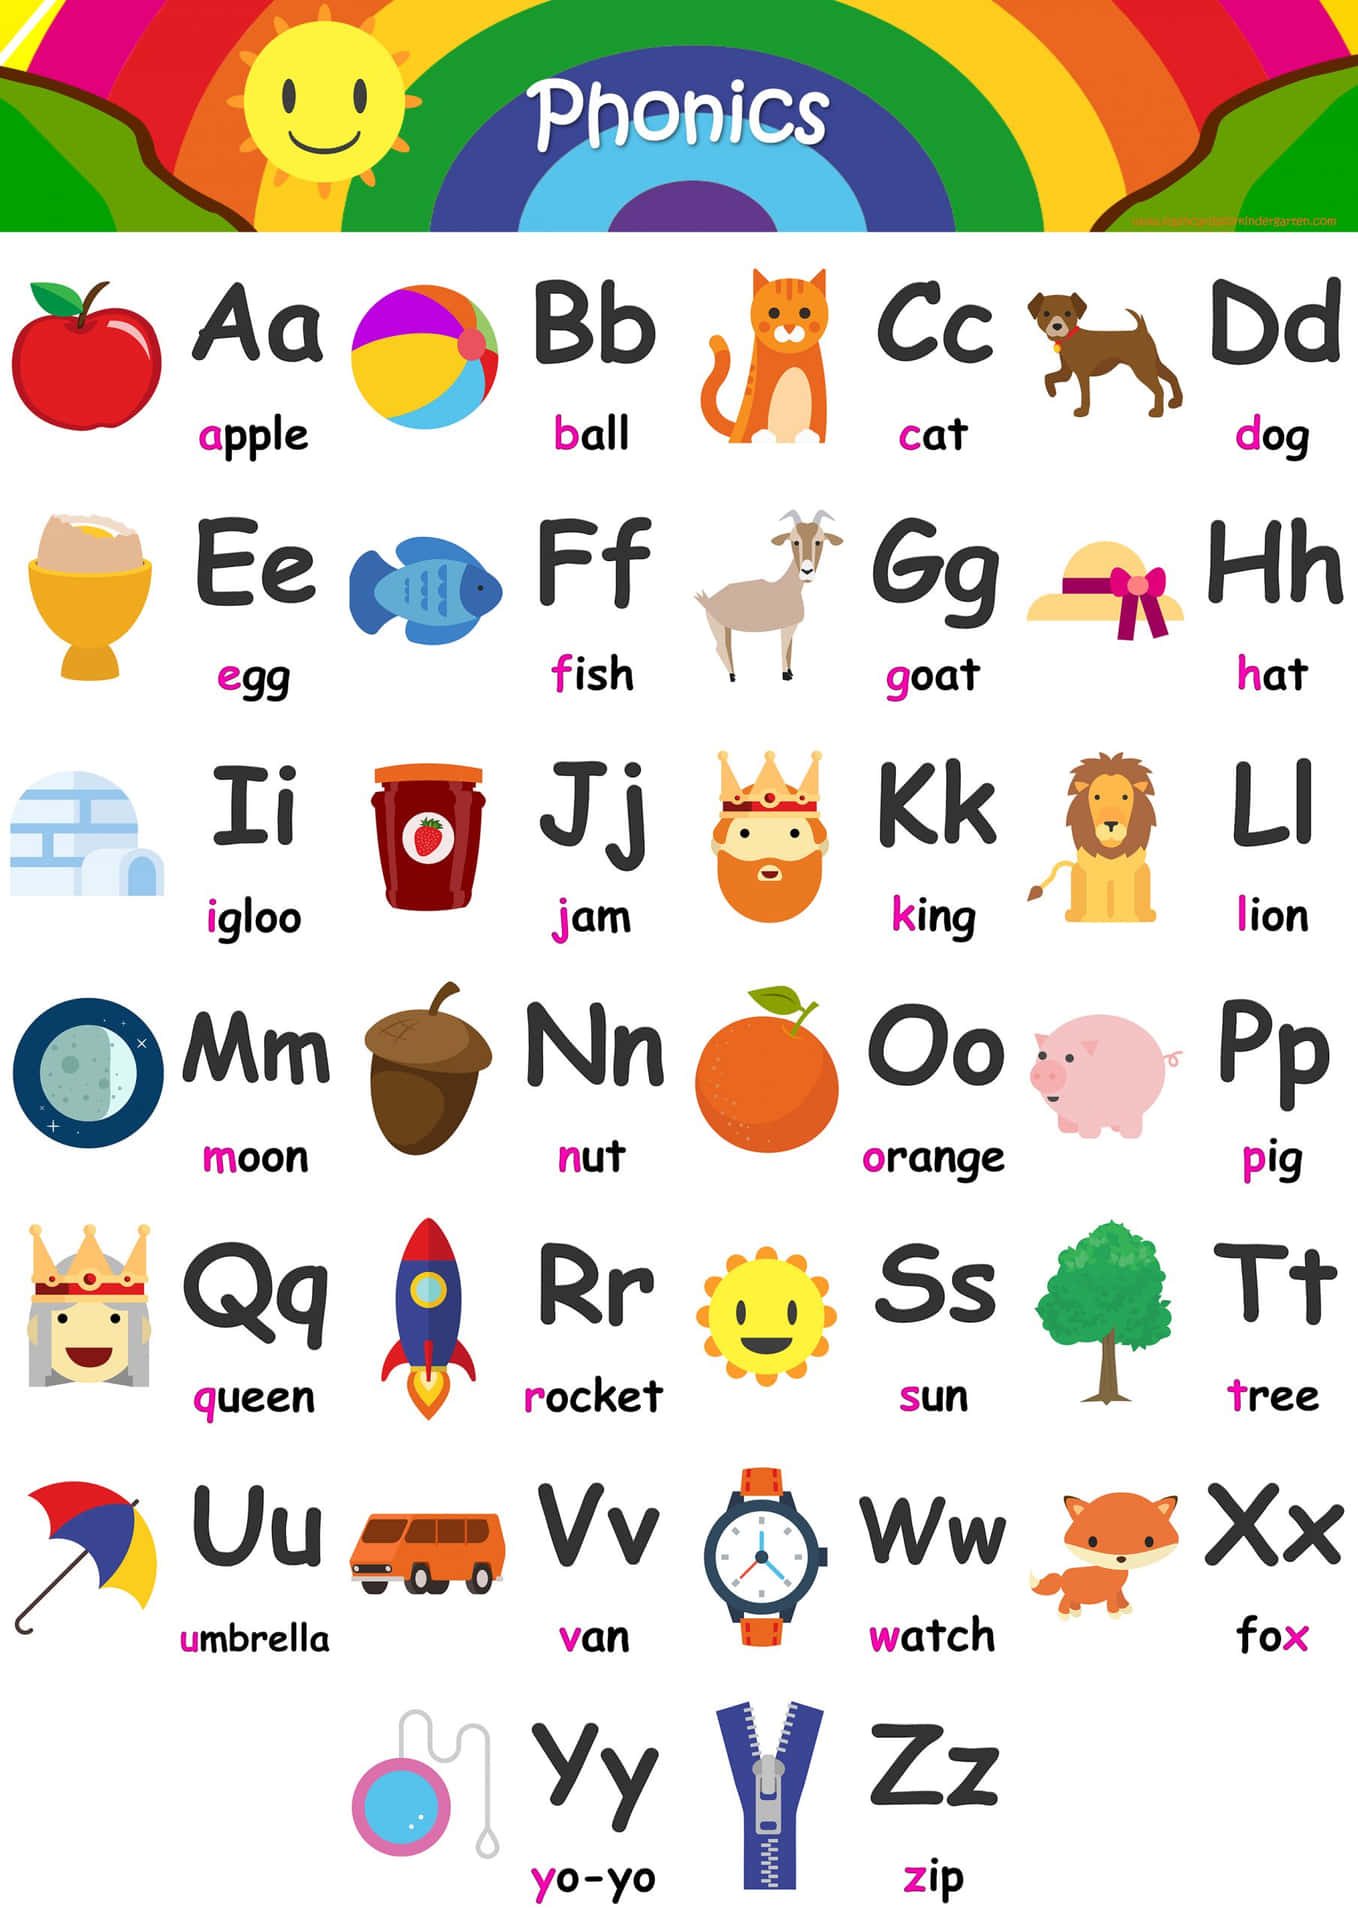 Phonics Alphabet Chart With Pictures Of Animals And Letters